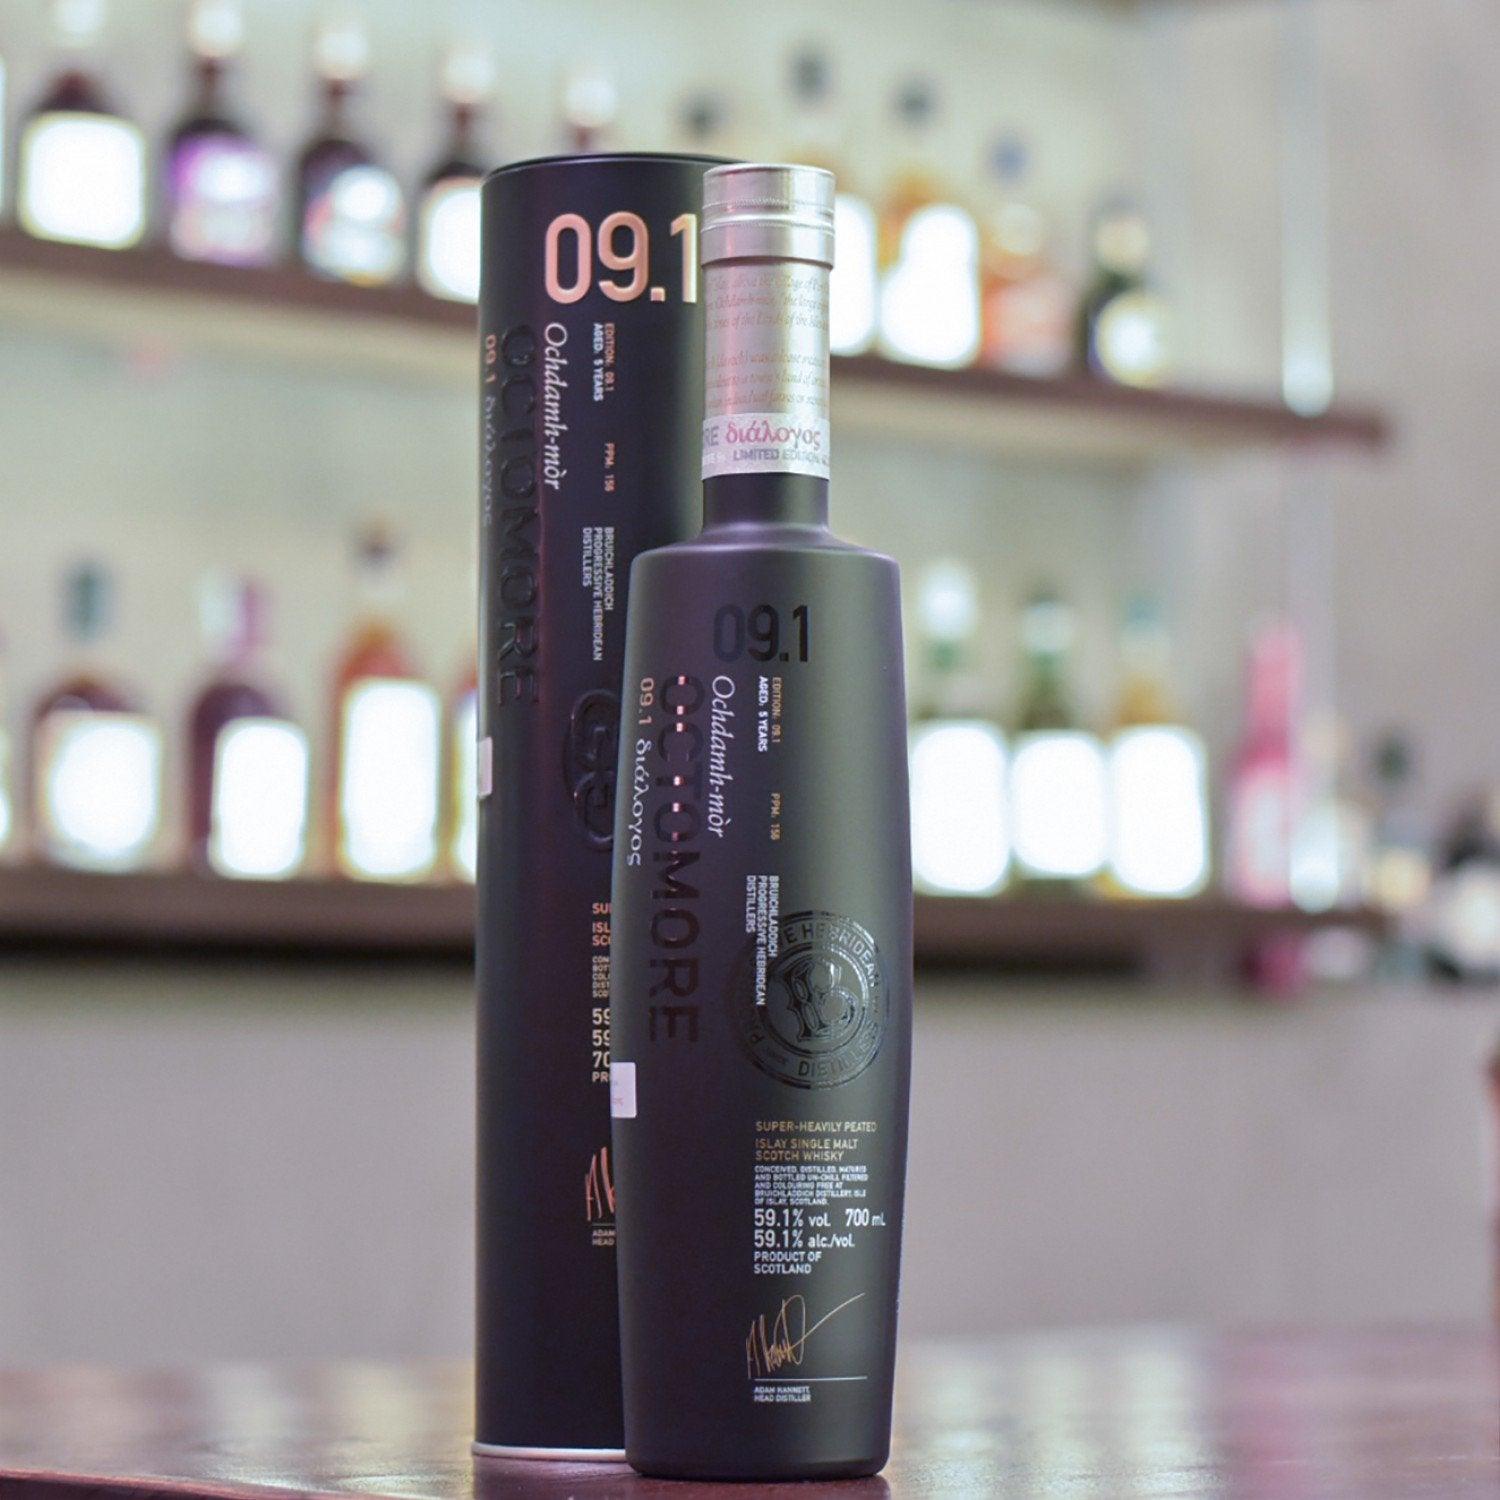 Octomore 5 Year Old Edition 9.1 - The Rare Malt